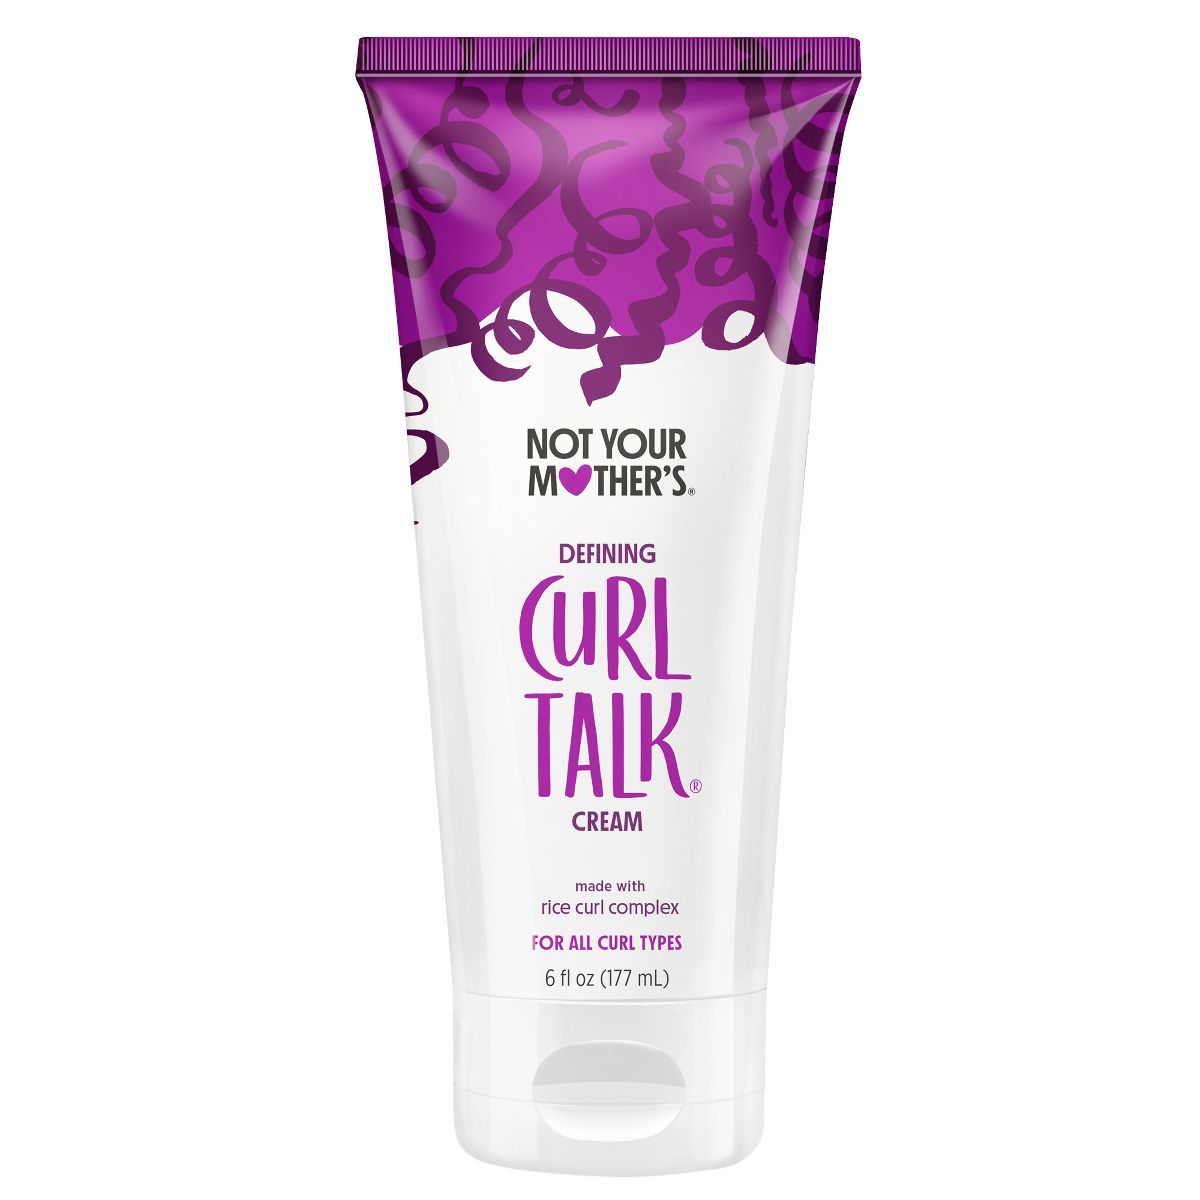 Not Your Mother's Curl Talk Cream | Target